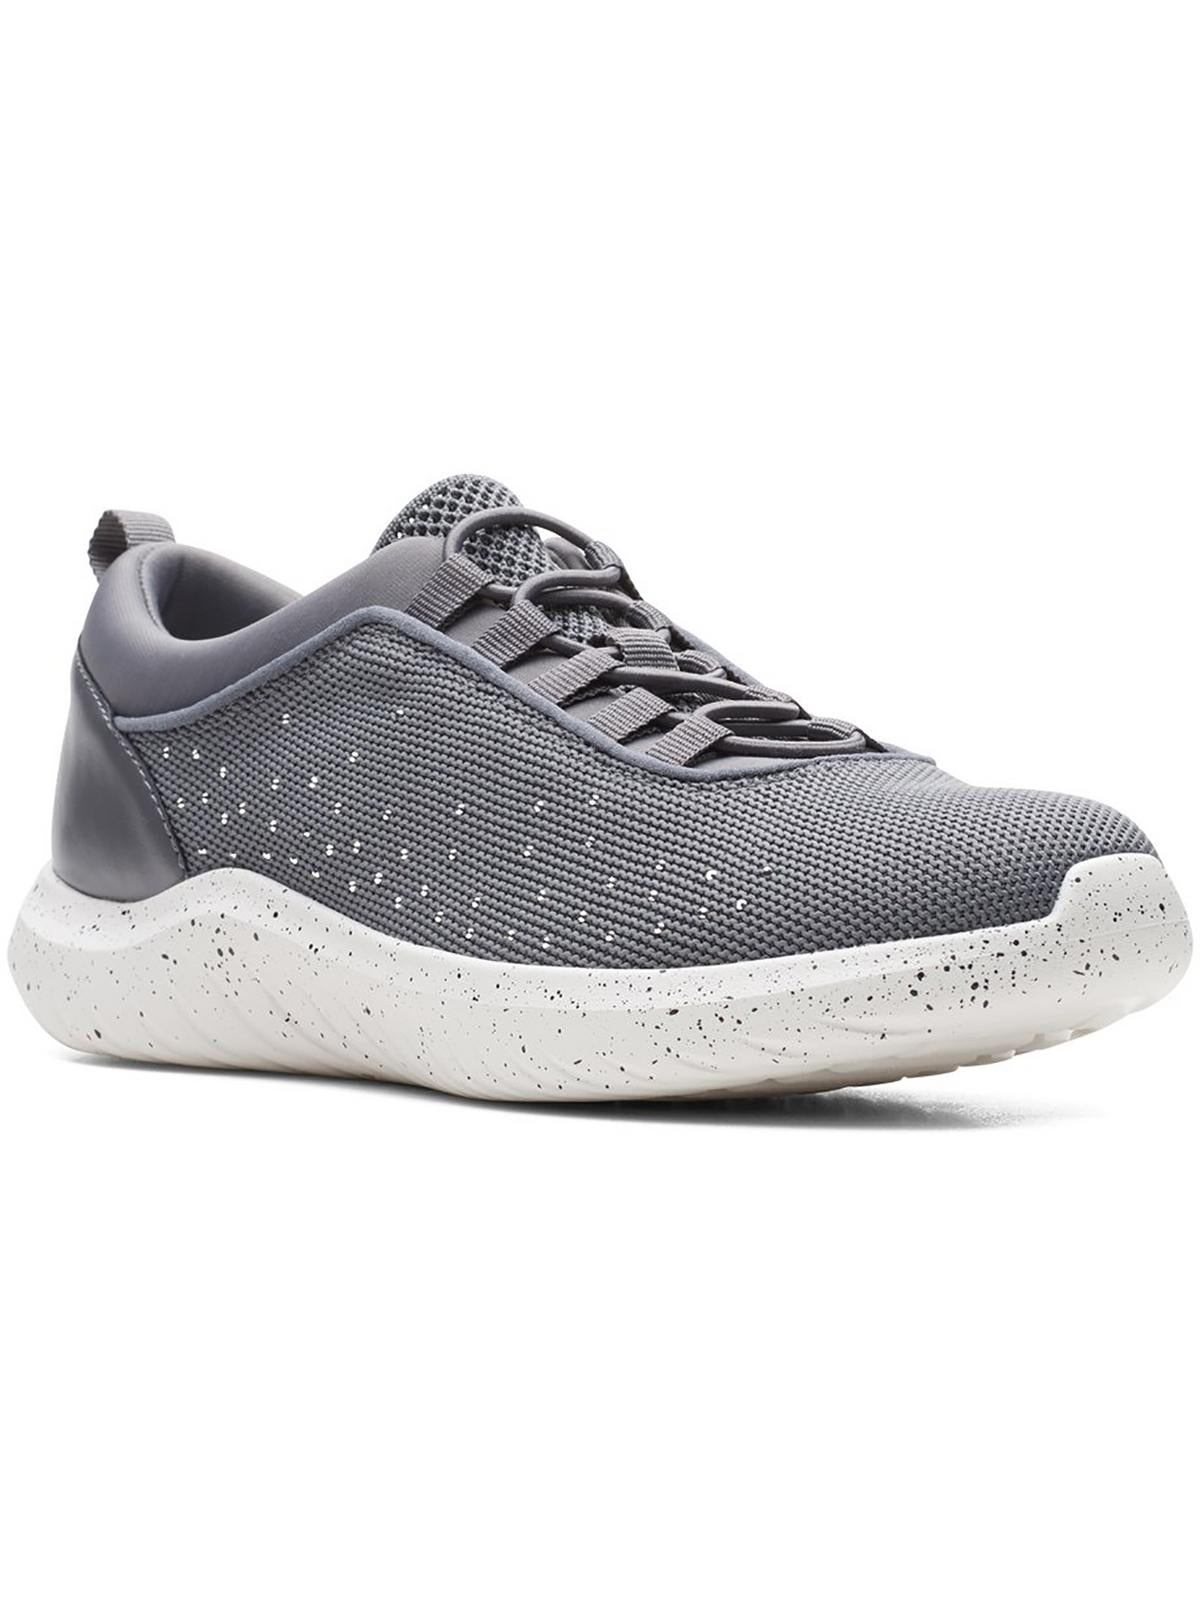 Shop Cloudsteppers By Clarks Nova Step Womens Rhinestone Fitness Athletic And Training Shoes In Grey